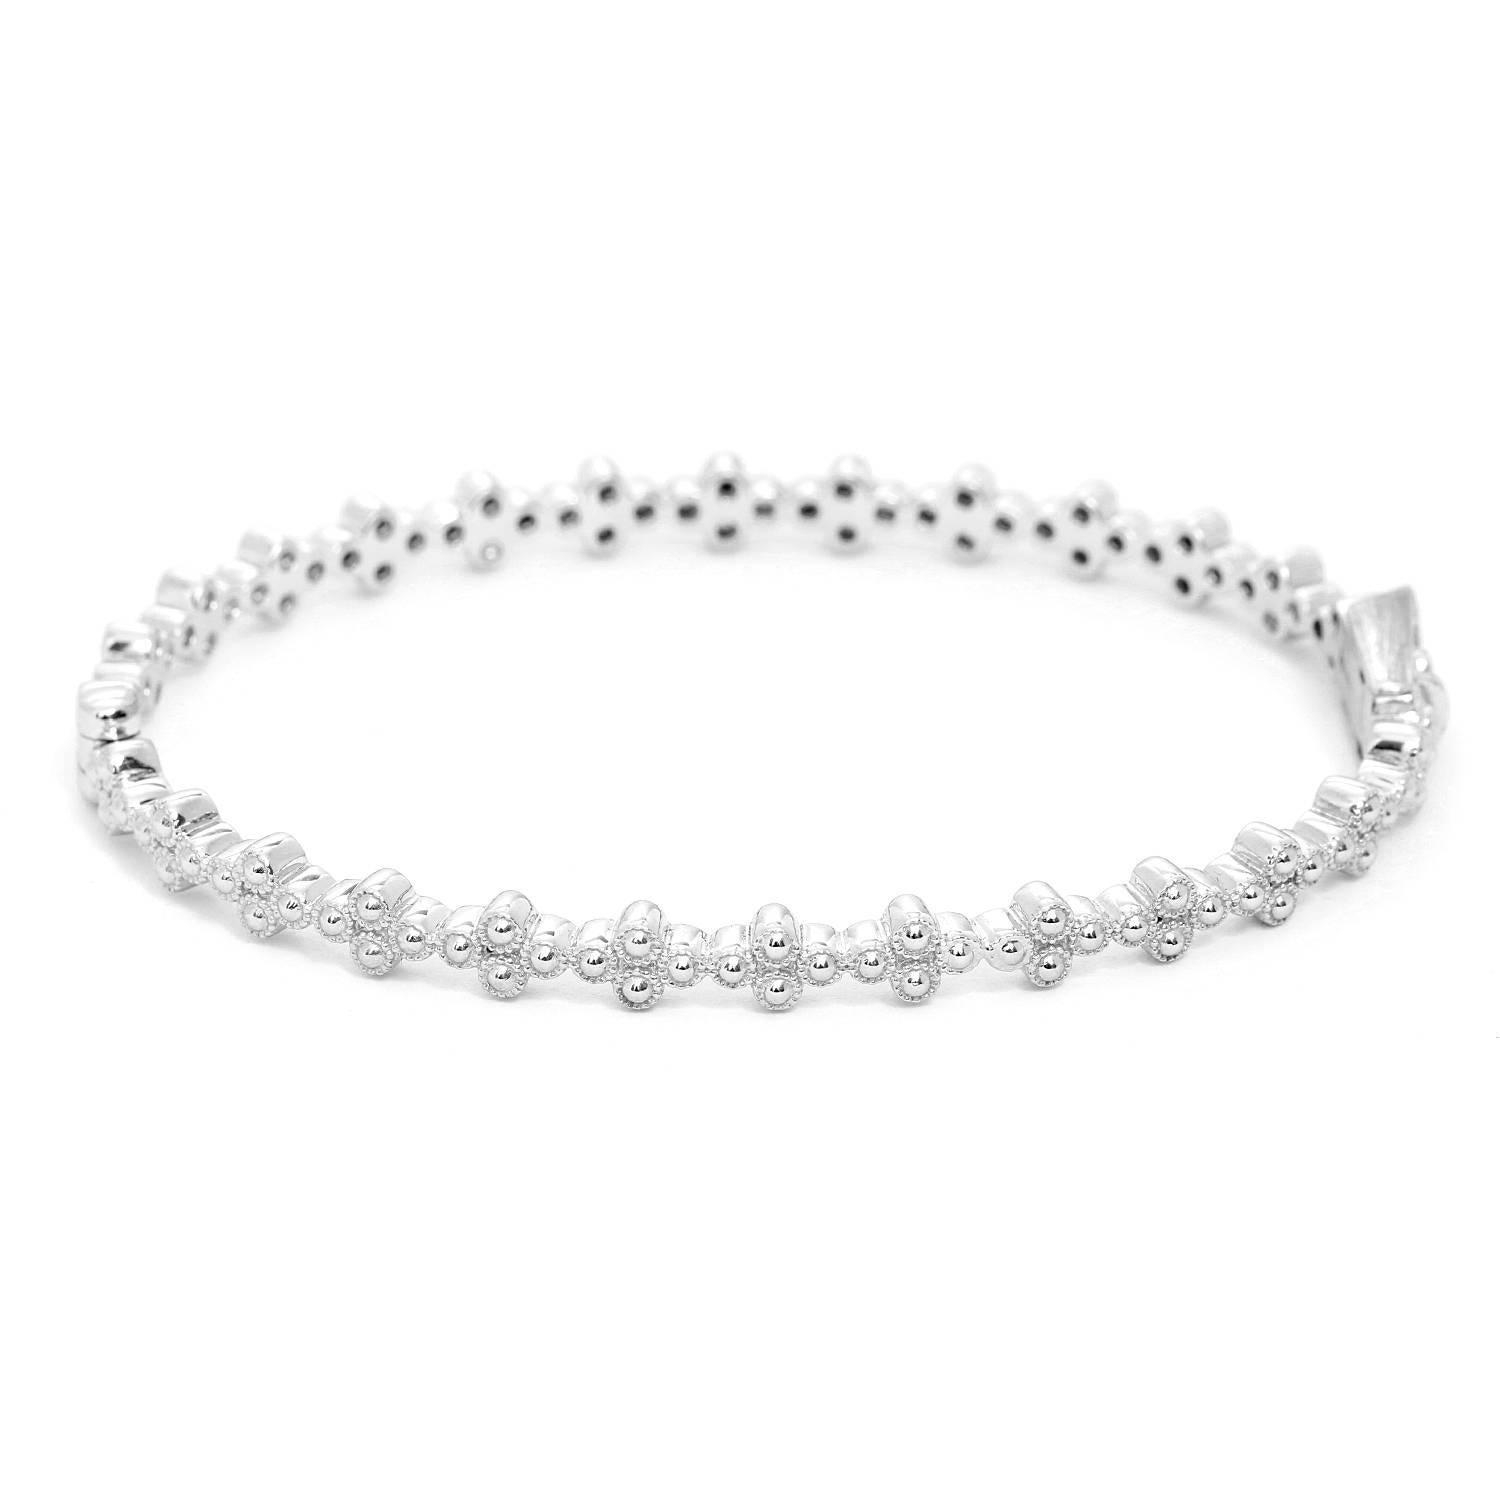 Jude Frances Provence Diamond Bangle - . Quad diamond bangle. Round diamonds bezel set in 18K white gold quads, .62 cts. This beautiful bangle can be used by itself or stacked with anything else.